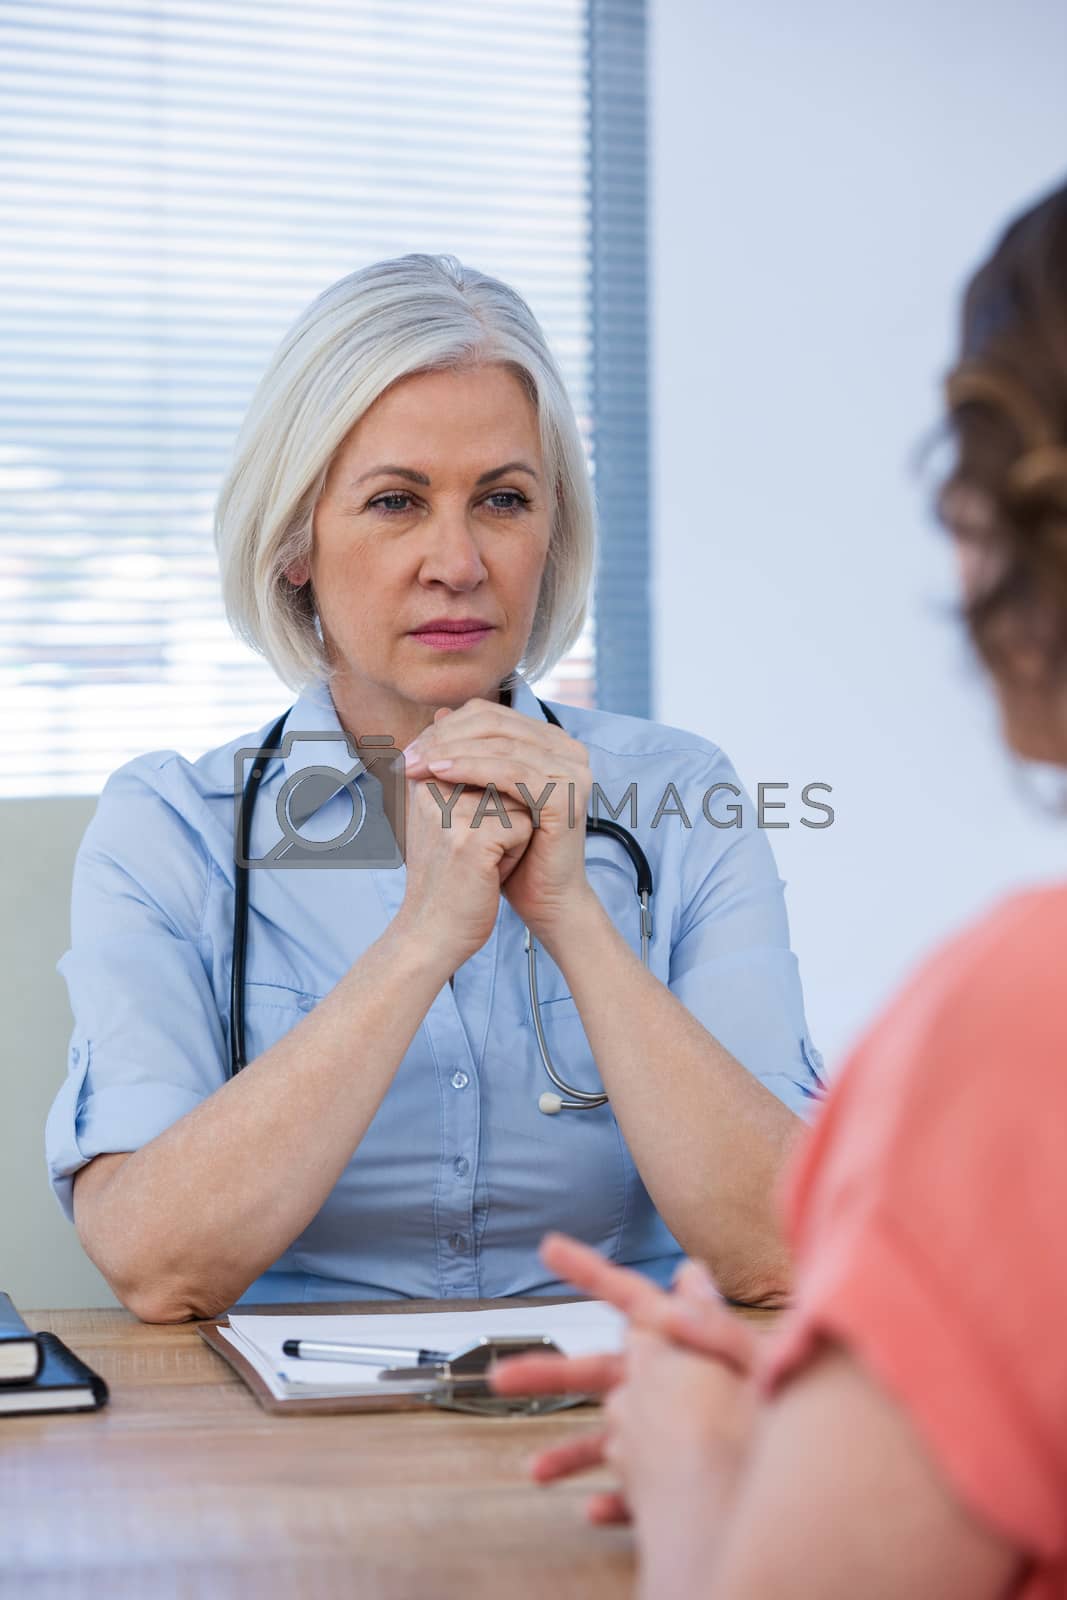 Royalty free image of Patient consulting a doctor by Wavebreakmedia